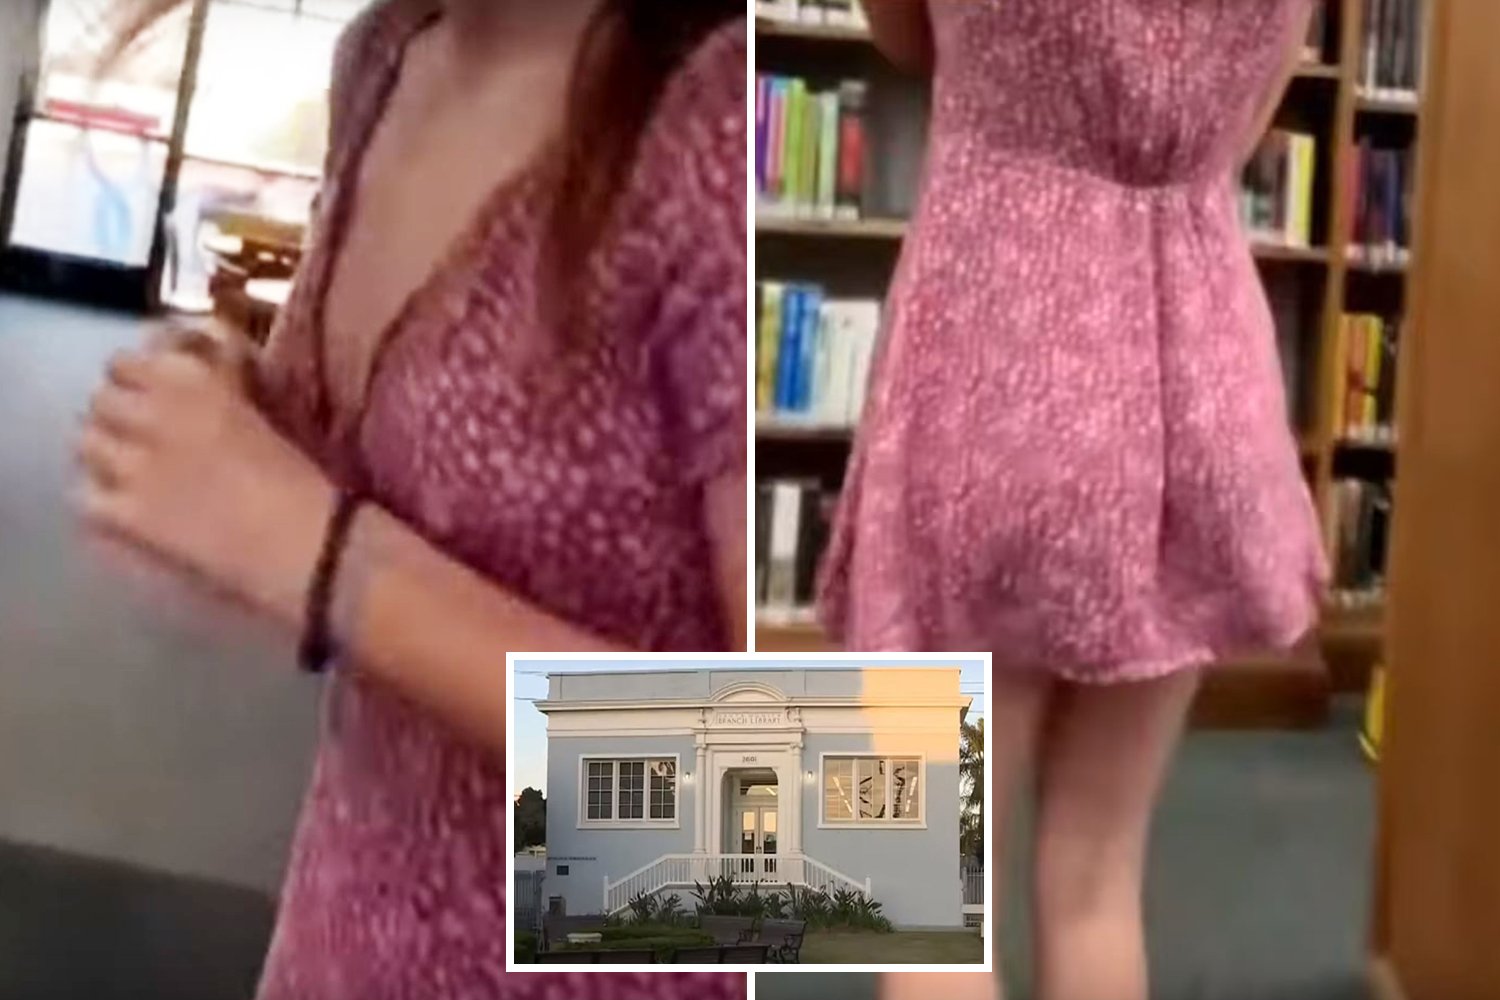 Pornhub movie filmed at LIBRARY as scenes shot yards away from students |  Flipboard